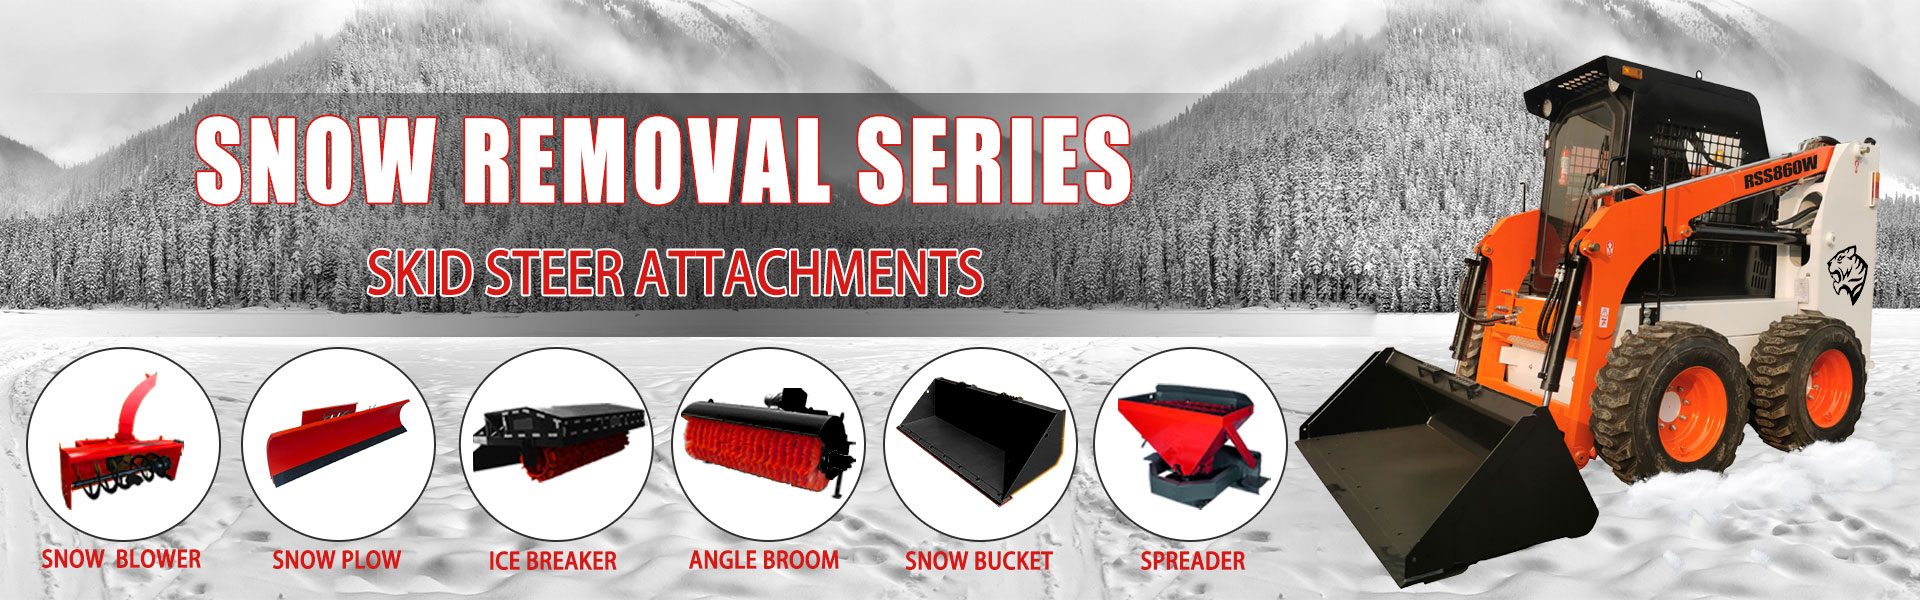 RAY-SNOW-REMOVAL-SERIES-ATTACHMENTS